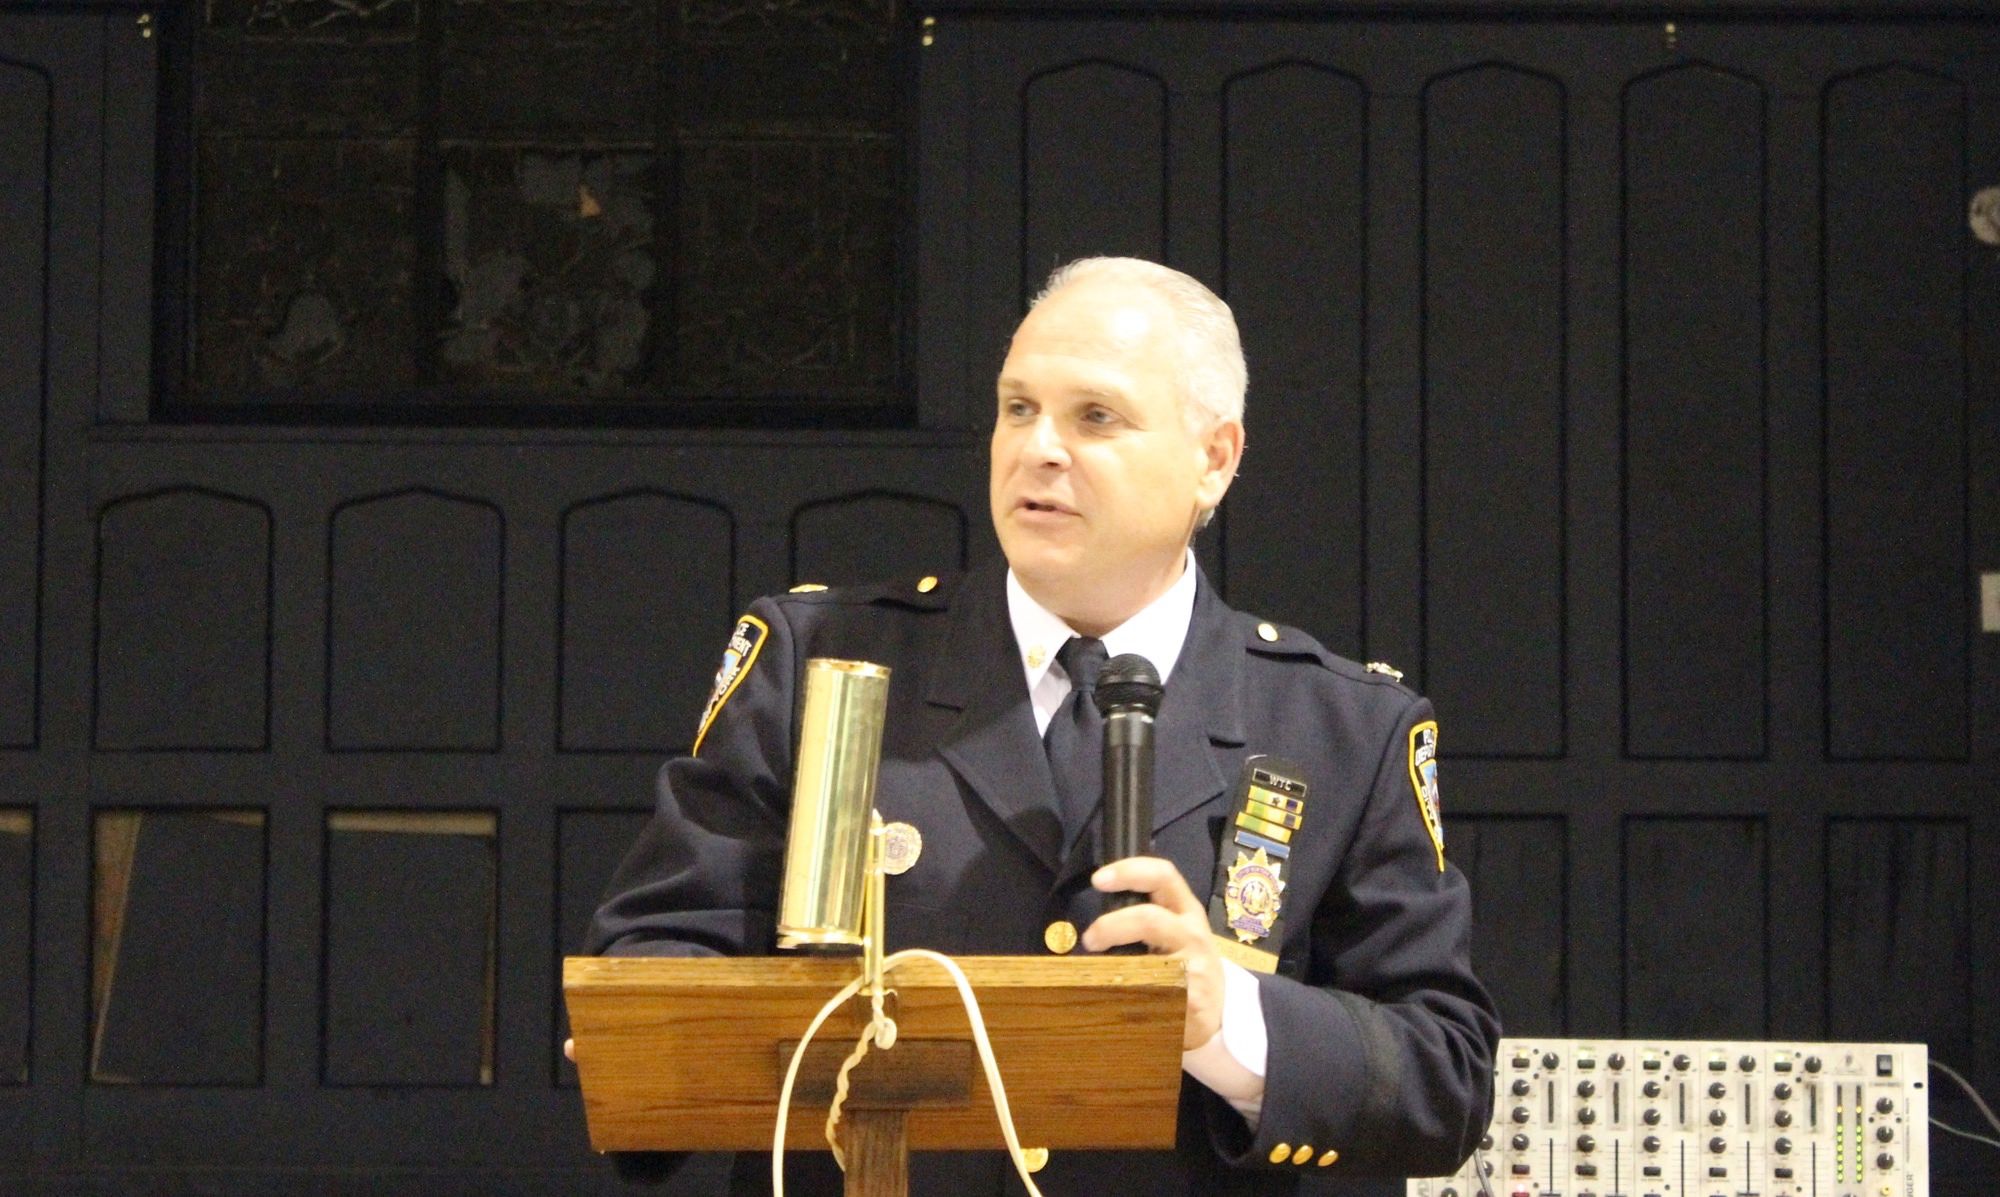 The 70th Precinct Announces New Executive Officer, Community Policing And More At Community Council Meeting